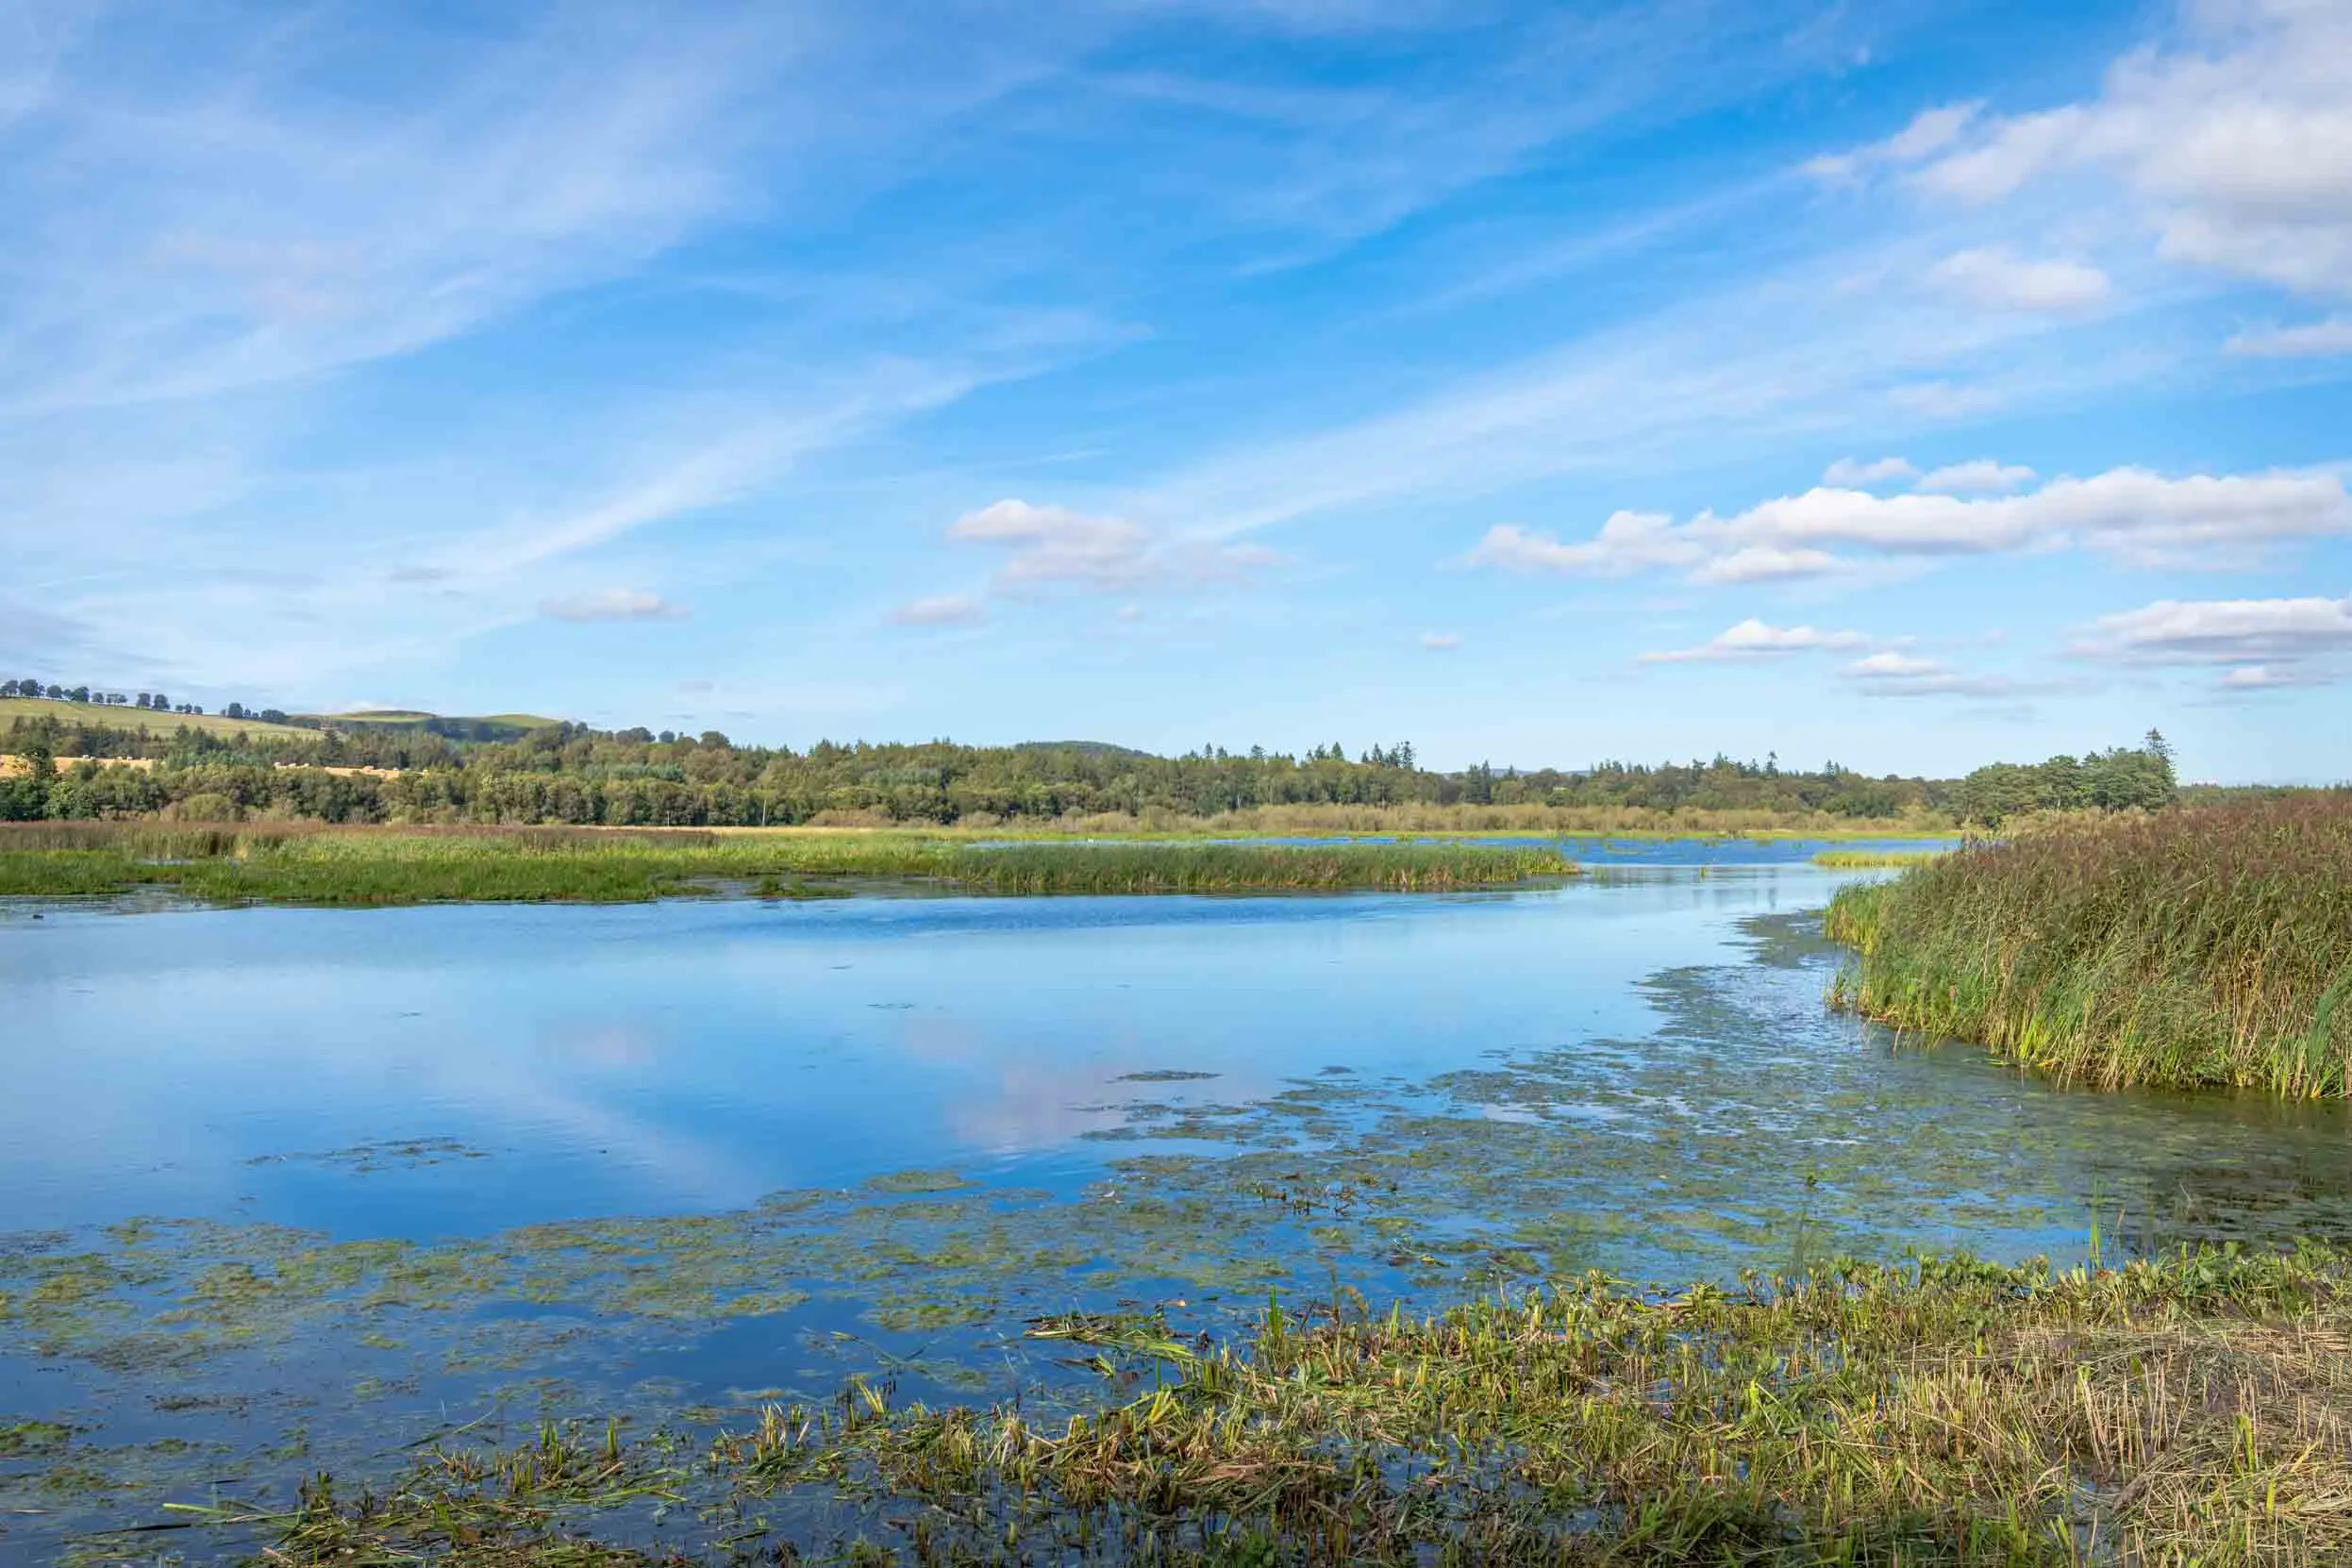 A body of water surrounded by reedbeds, with a blue sky and wispy white clouds above.